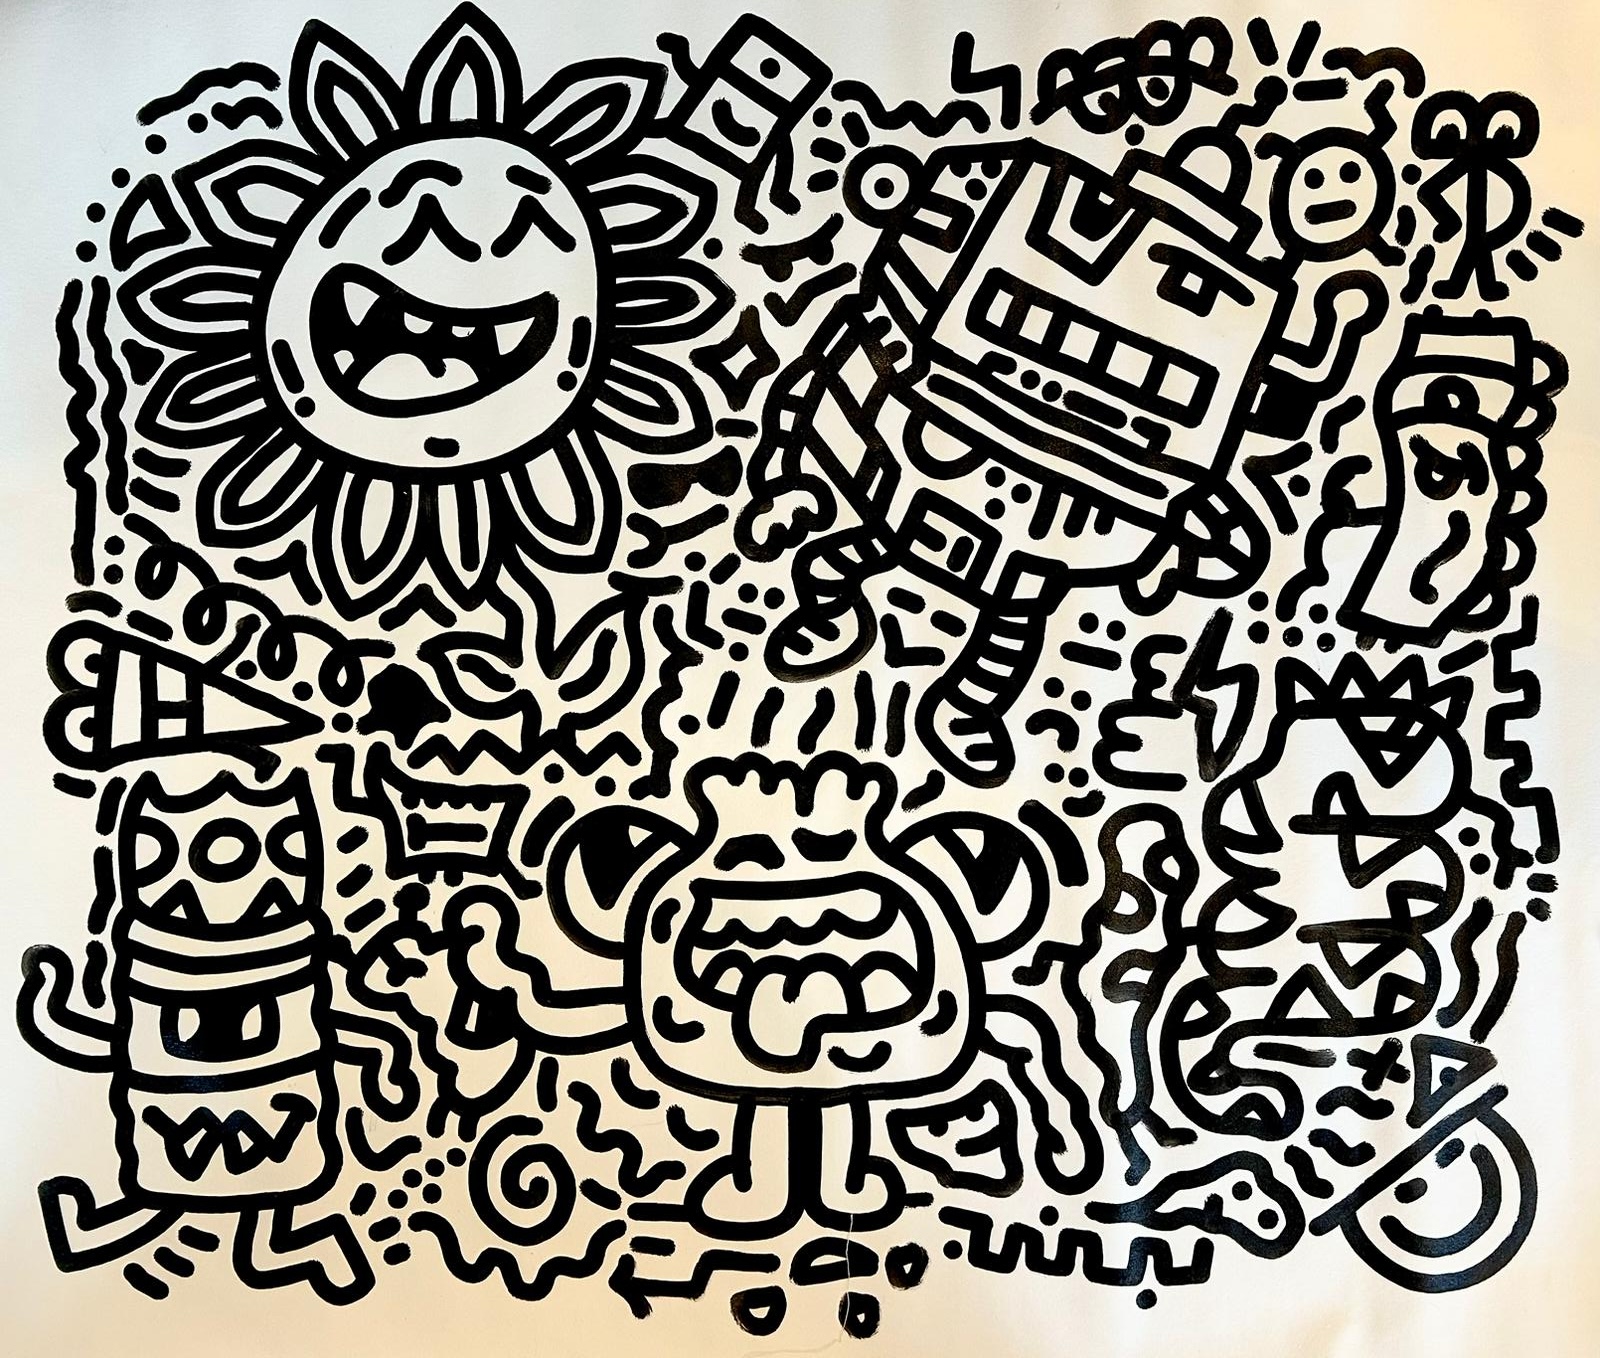 Friends , 140x120, Marker on Canvas,2021